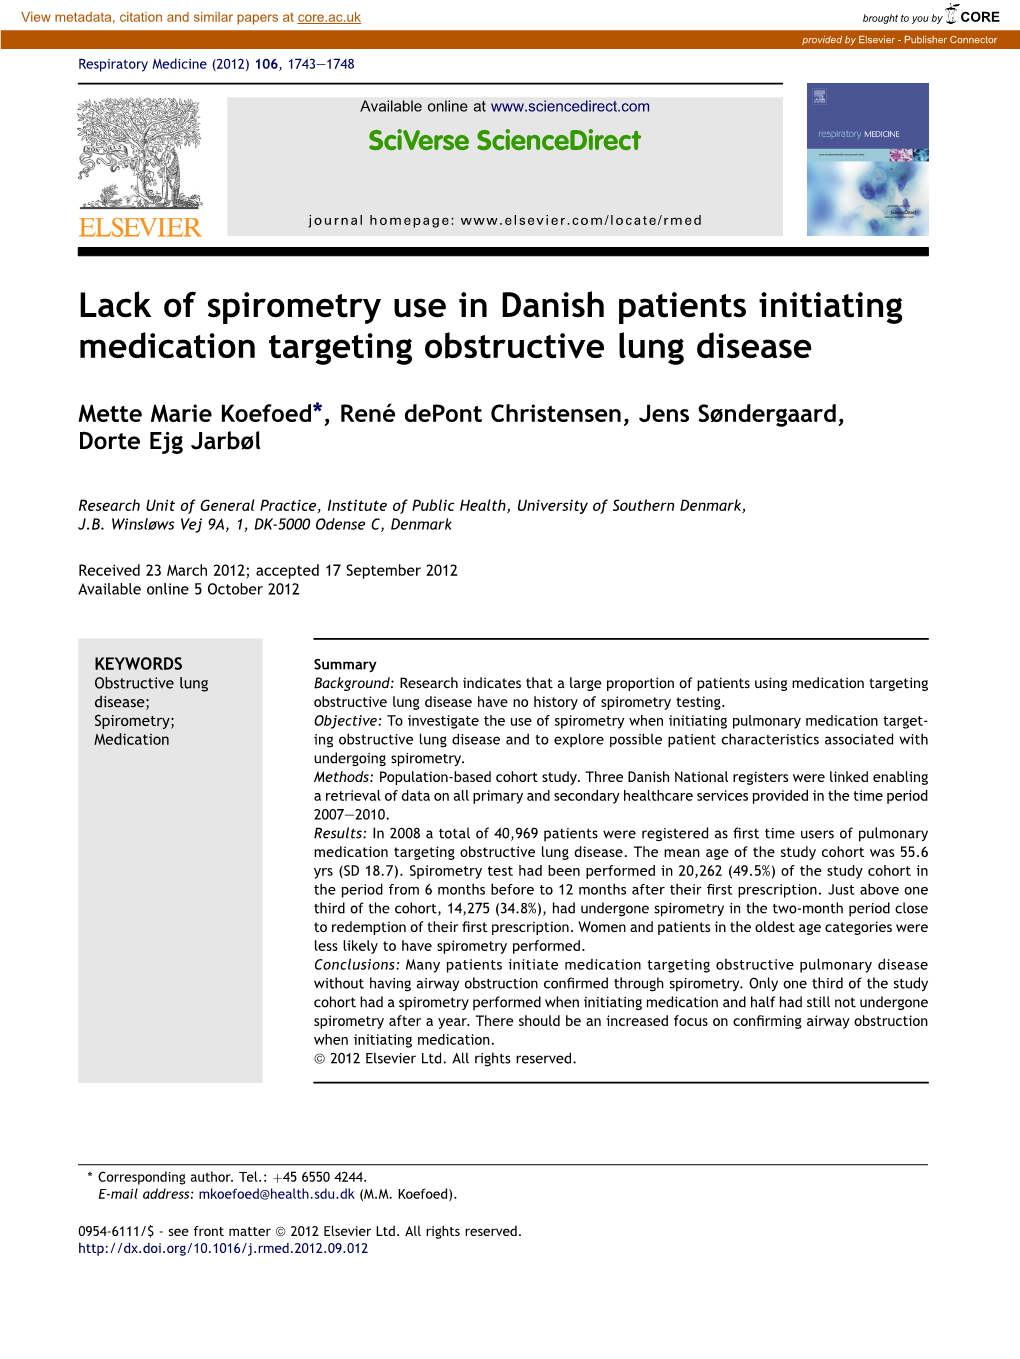 Lack of Spirometry Use in Danish Patients Initiating Medication Targeting Obstructive Lung Disease